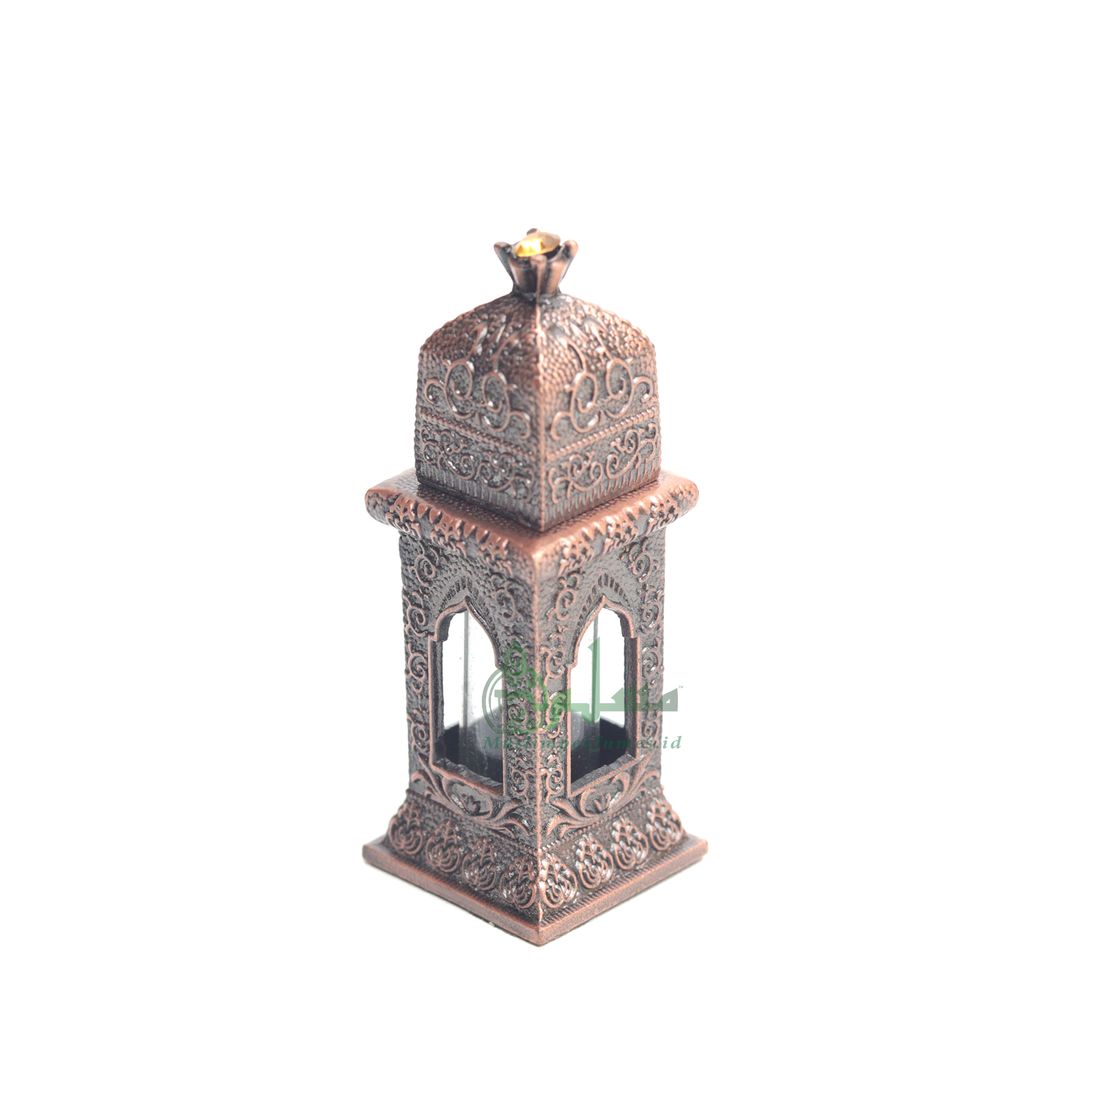 SMALL EMPTY 3-ml Andalusia Mehrab Square Red Bronze Color Arab Perfume Attar Oud Oil Bottle Islamic Glass Vial Bejeweled Dipper Cap